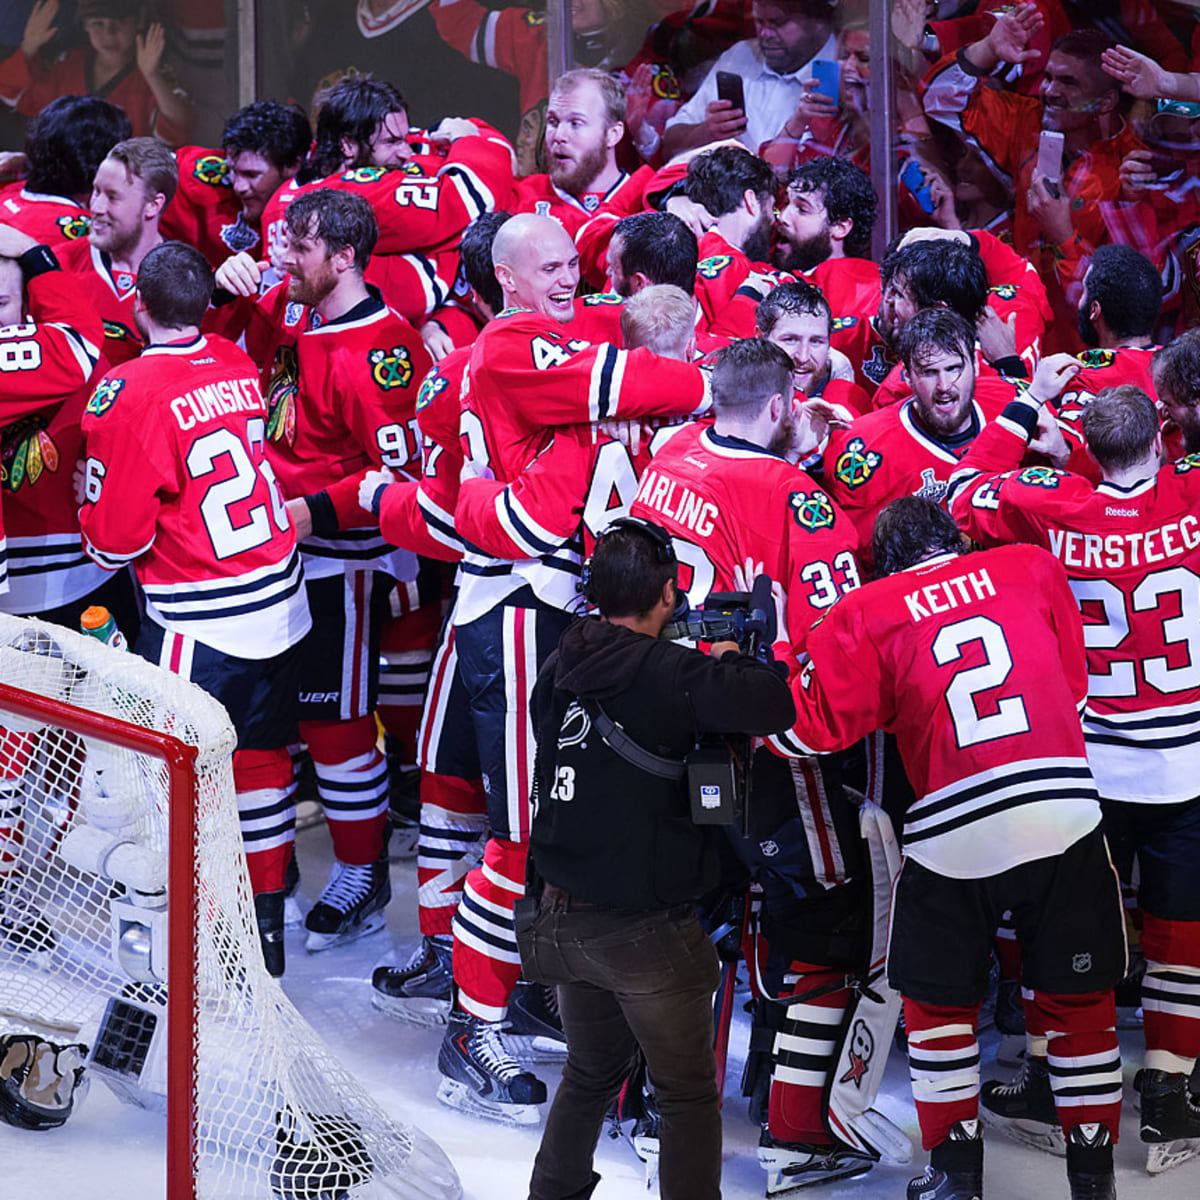 Chicago Blackhawks Take Home 3rd Stanley Cup In 6 Years With 2-0